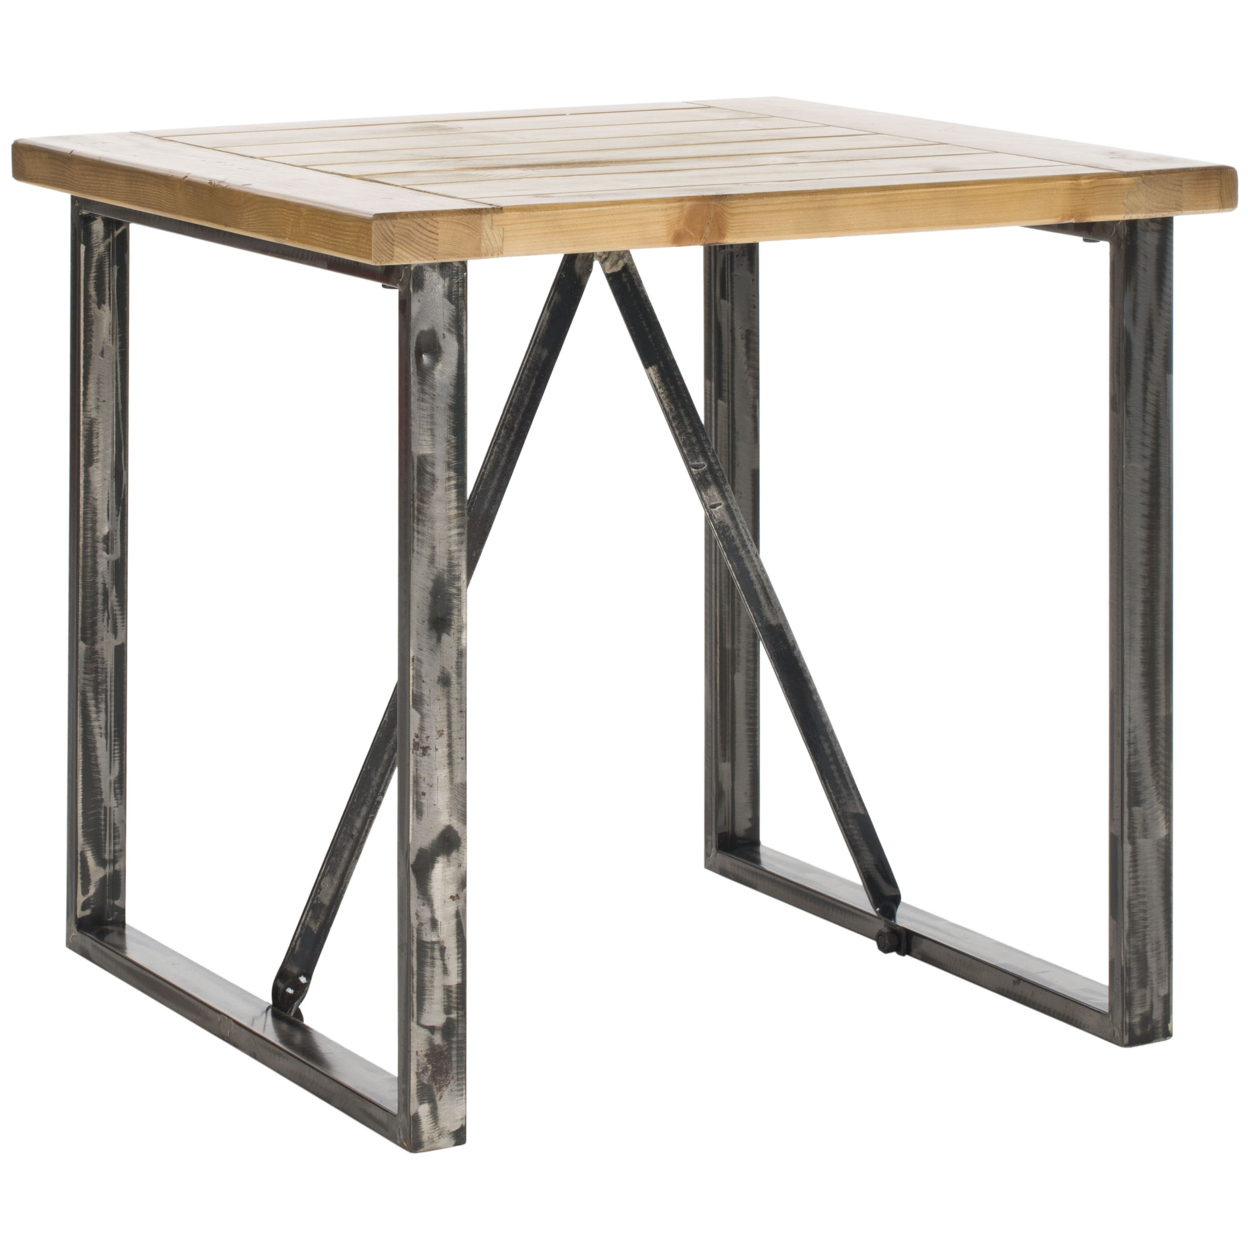 SAFAVIEH Chase Wood Top End Table Natural